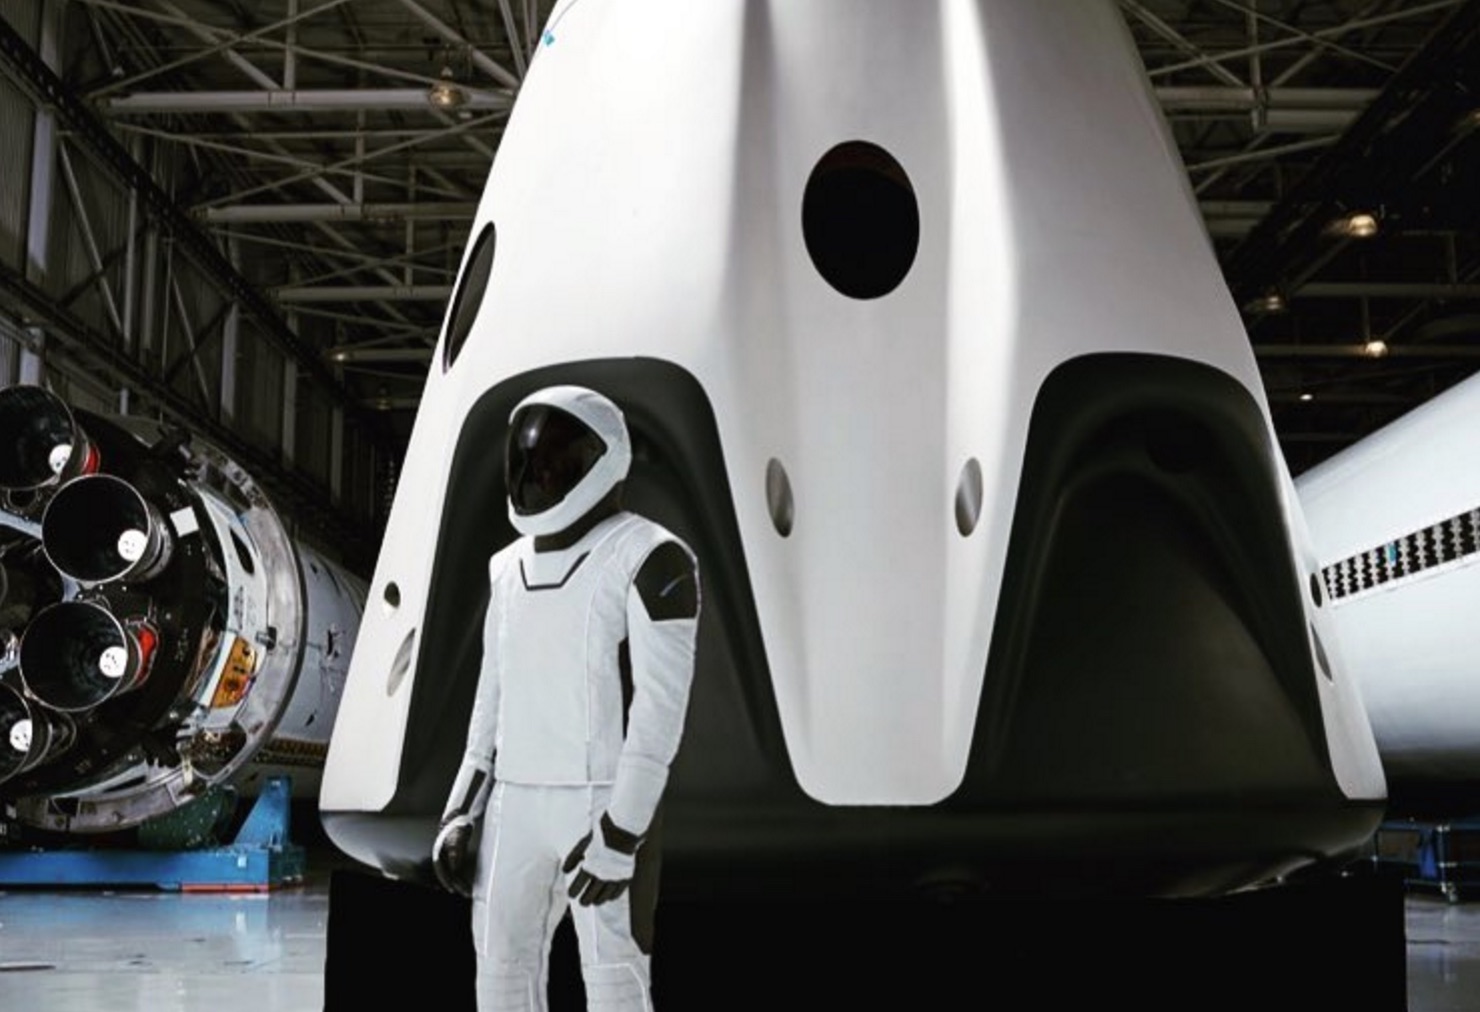 Elon Musk Offers Full Look at the SpaceX Space Suit